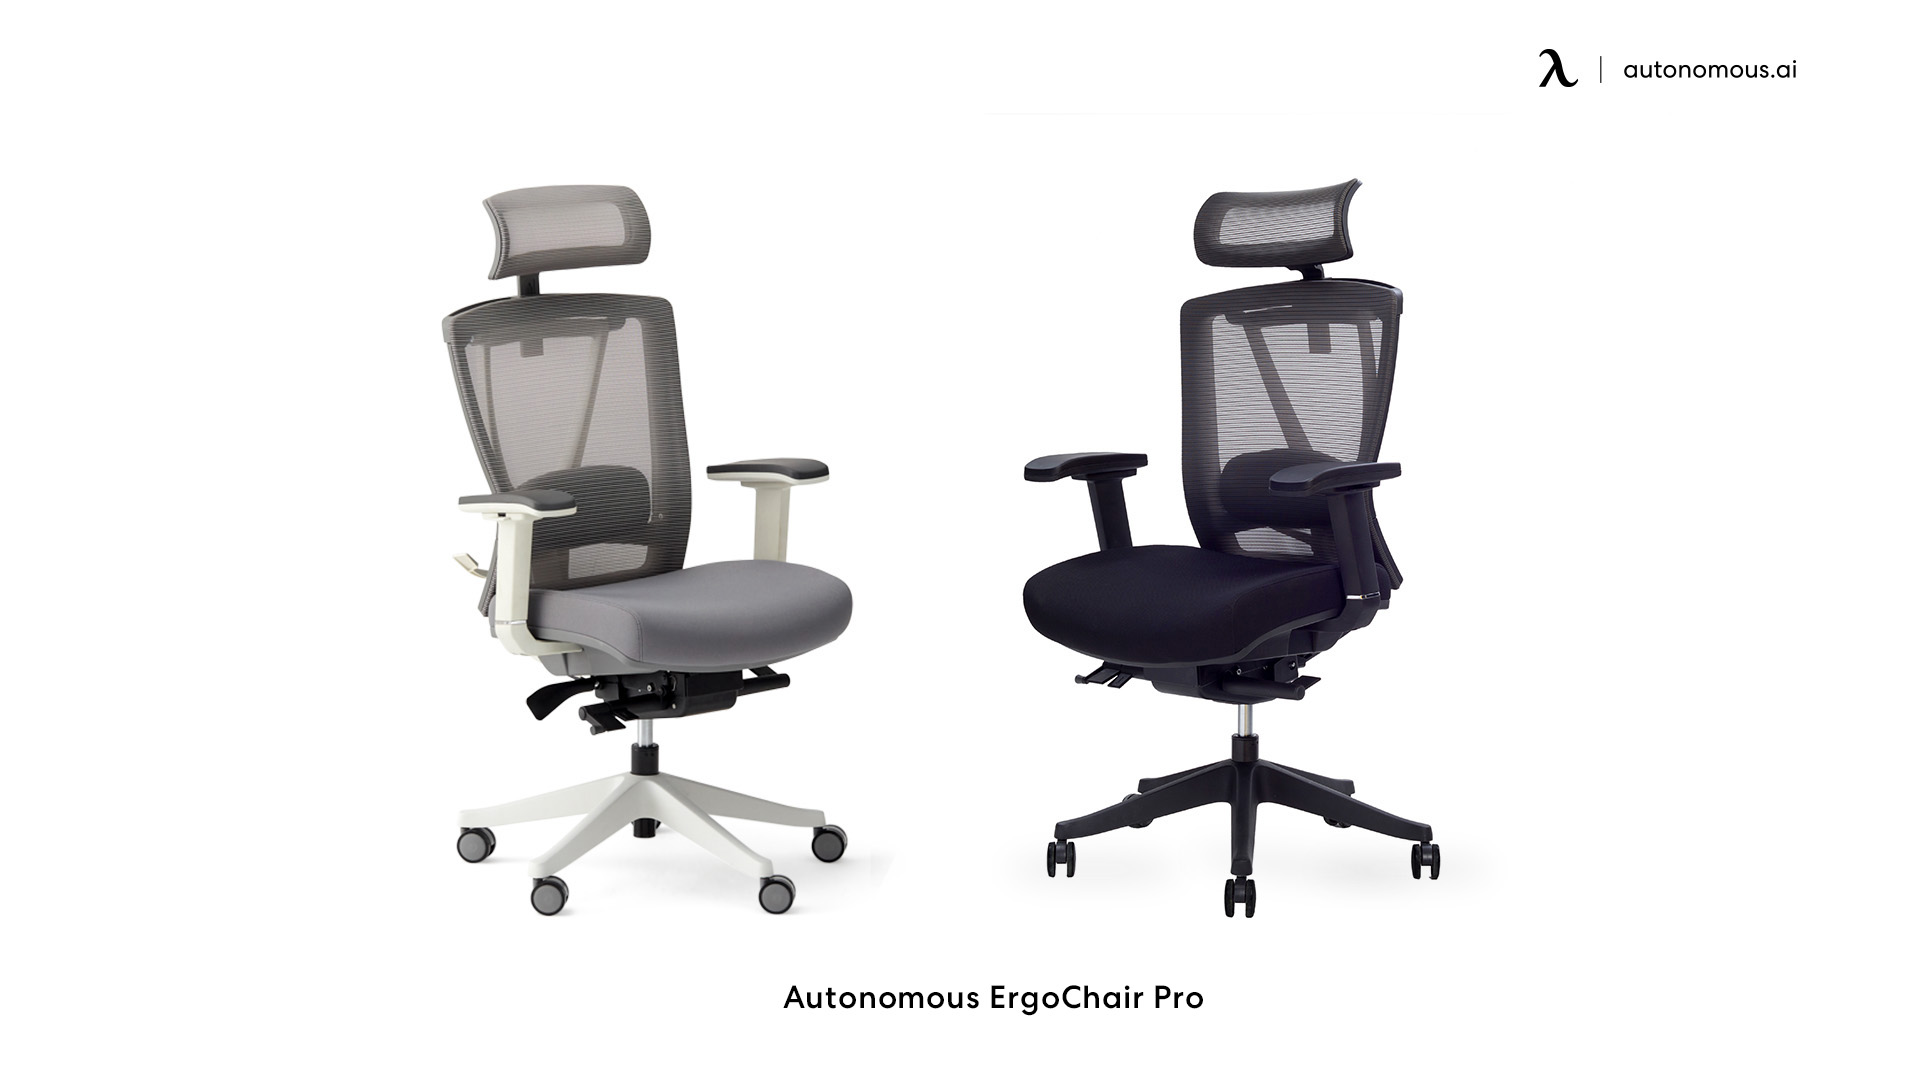 ErgoChair Pro white and grey office chair